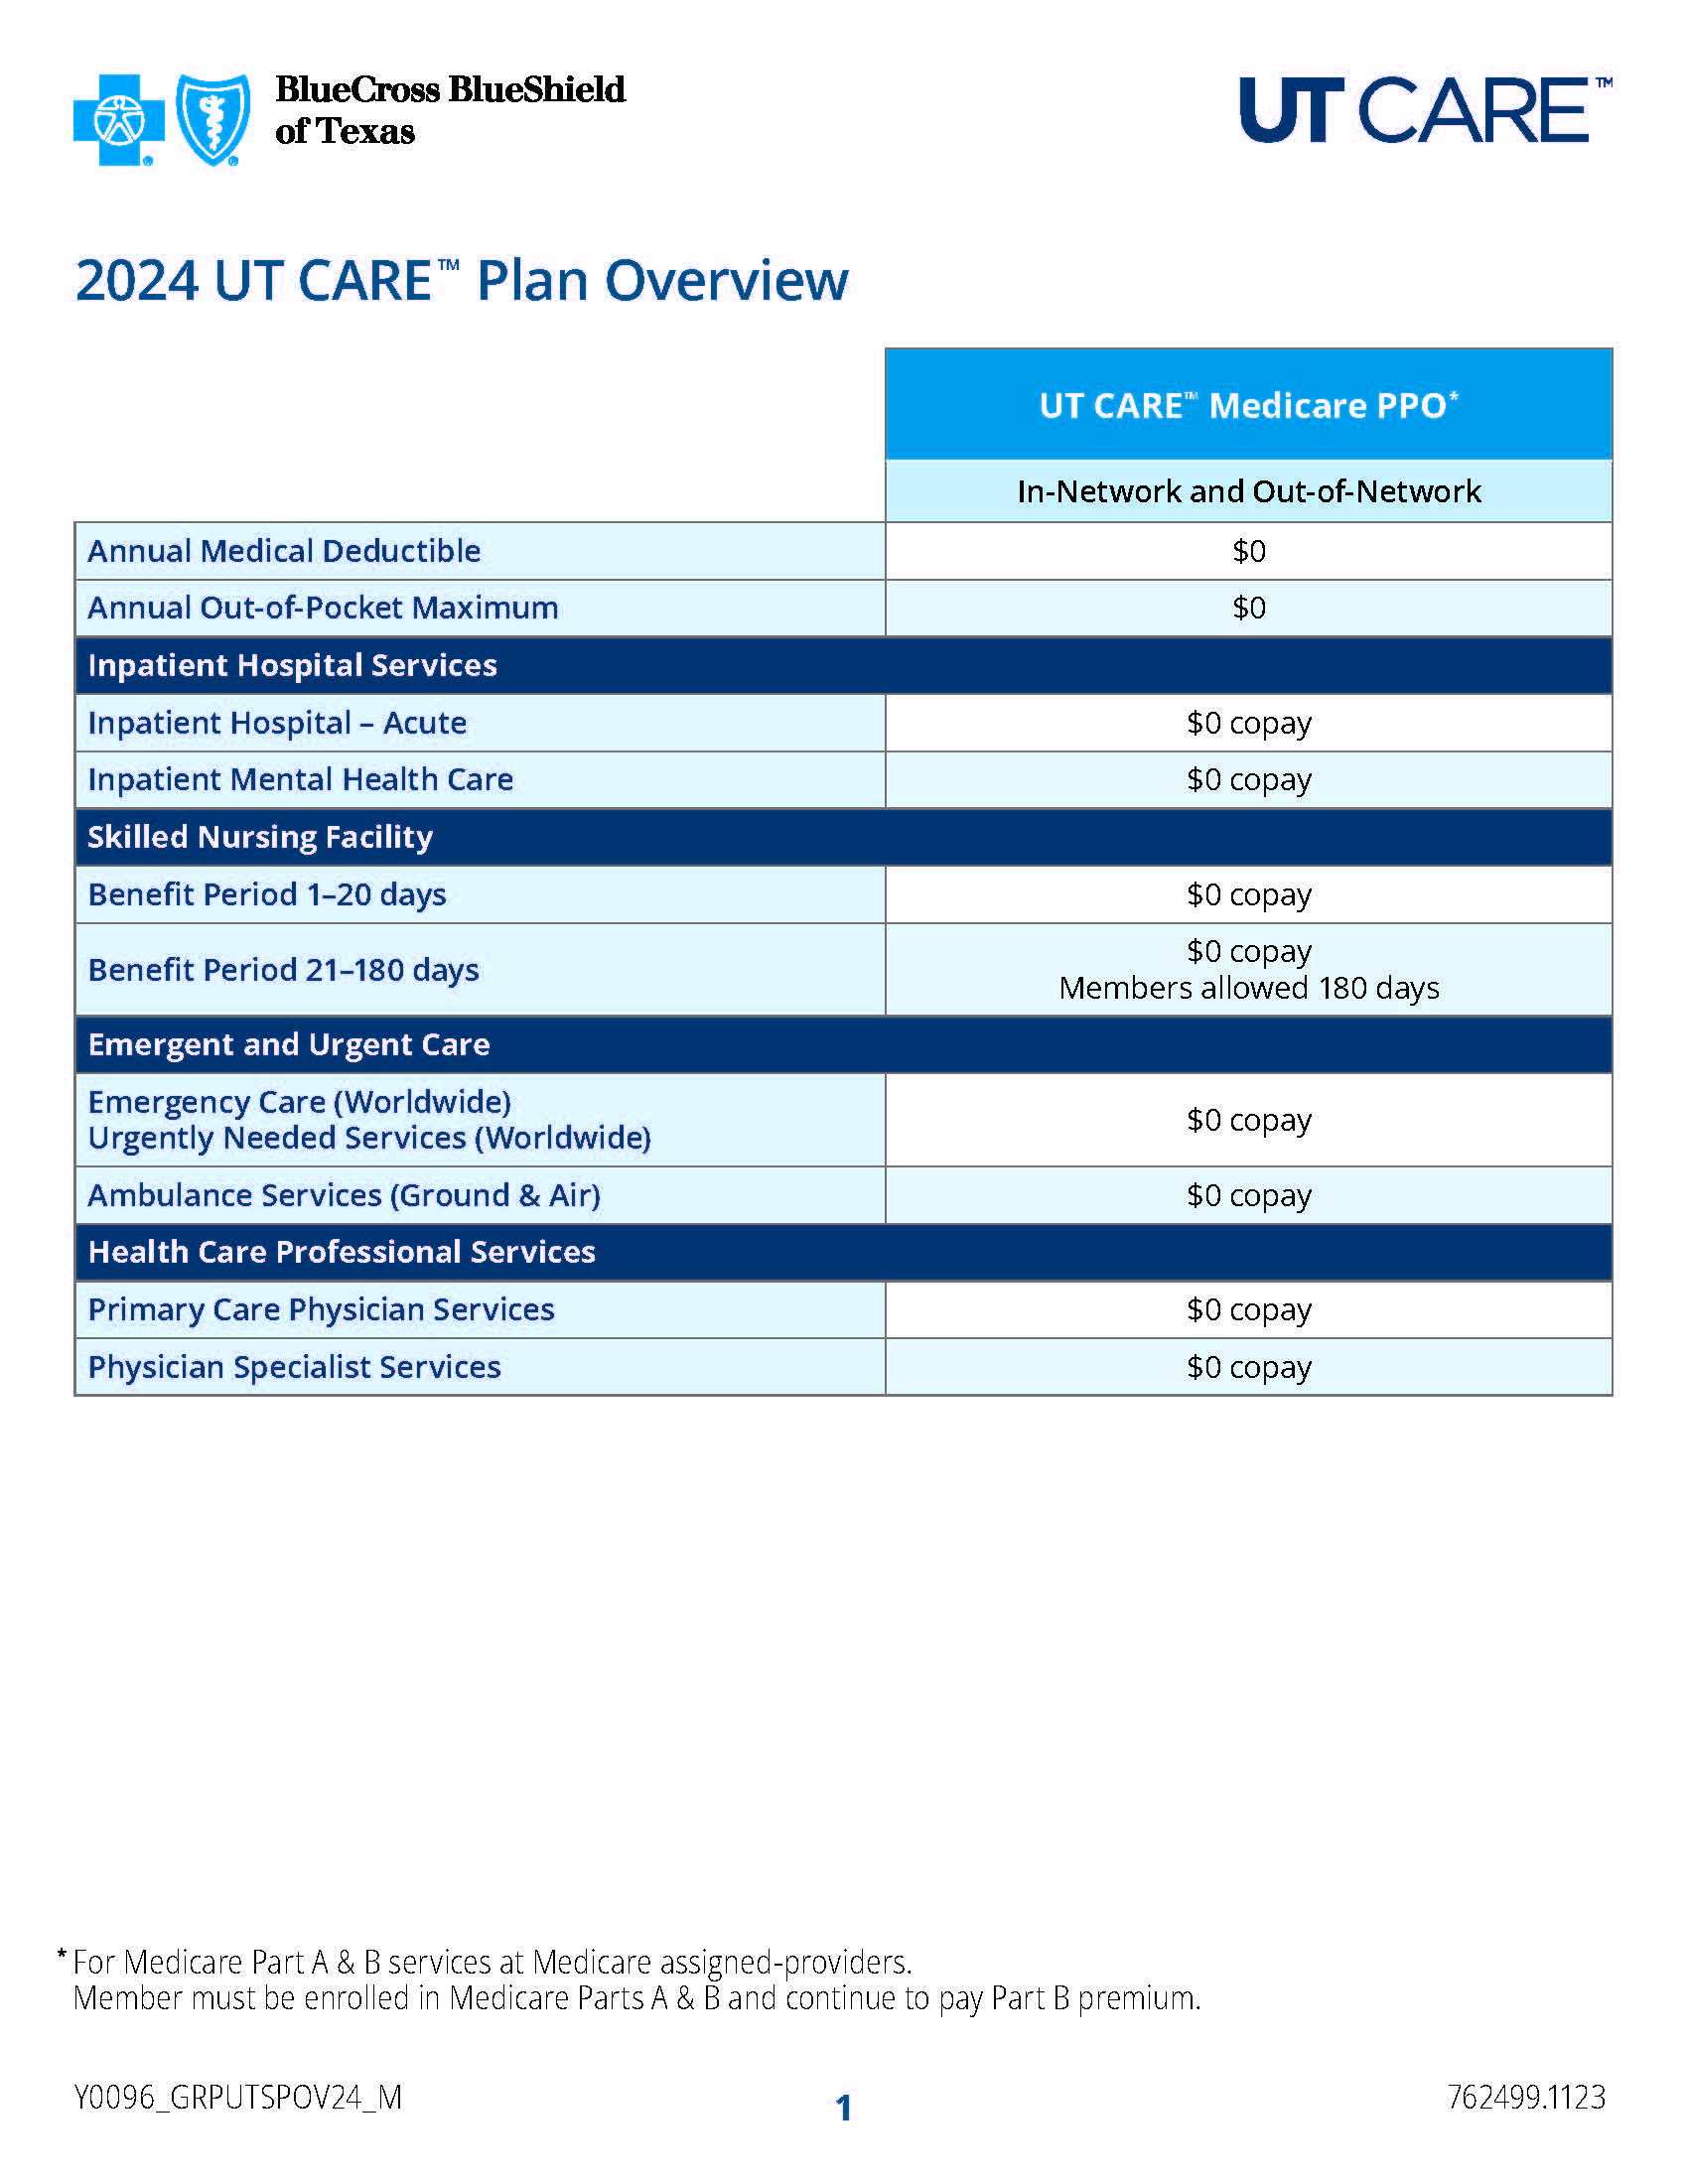 UT CARE Medicare Overview cover image